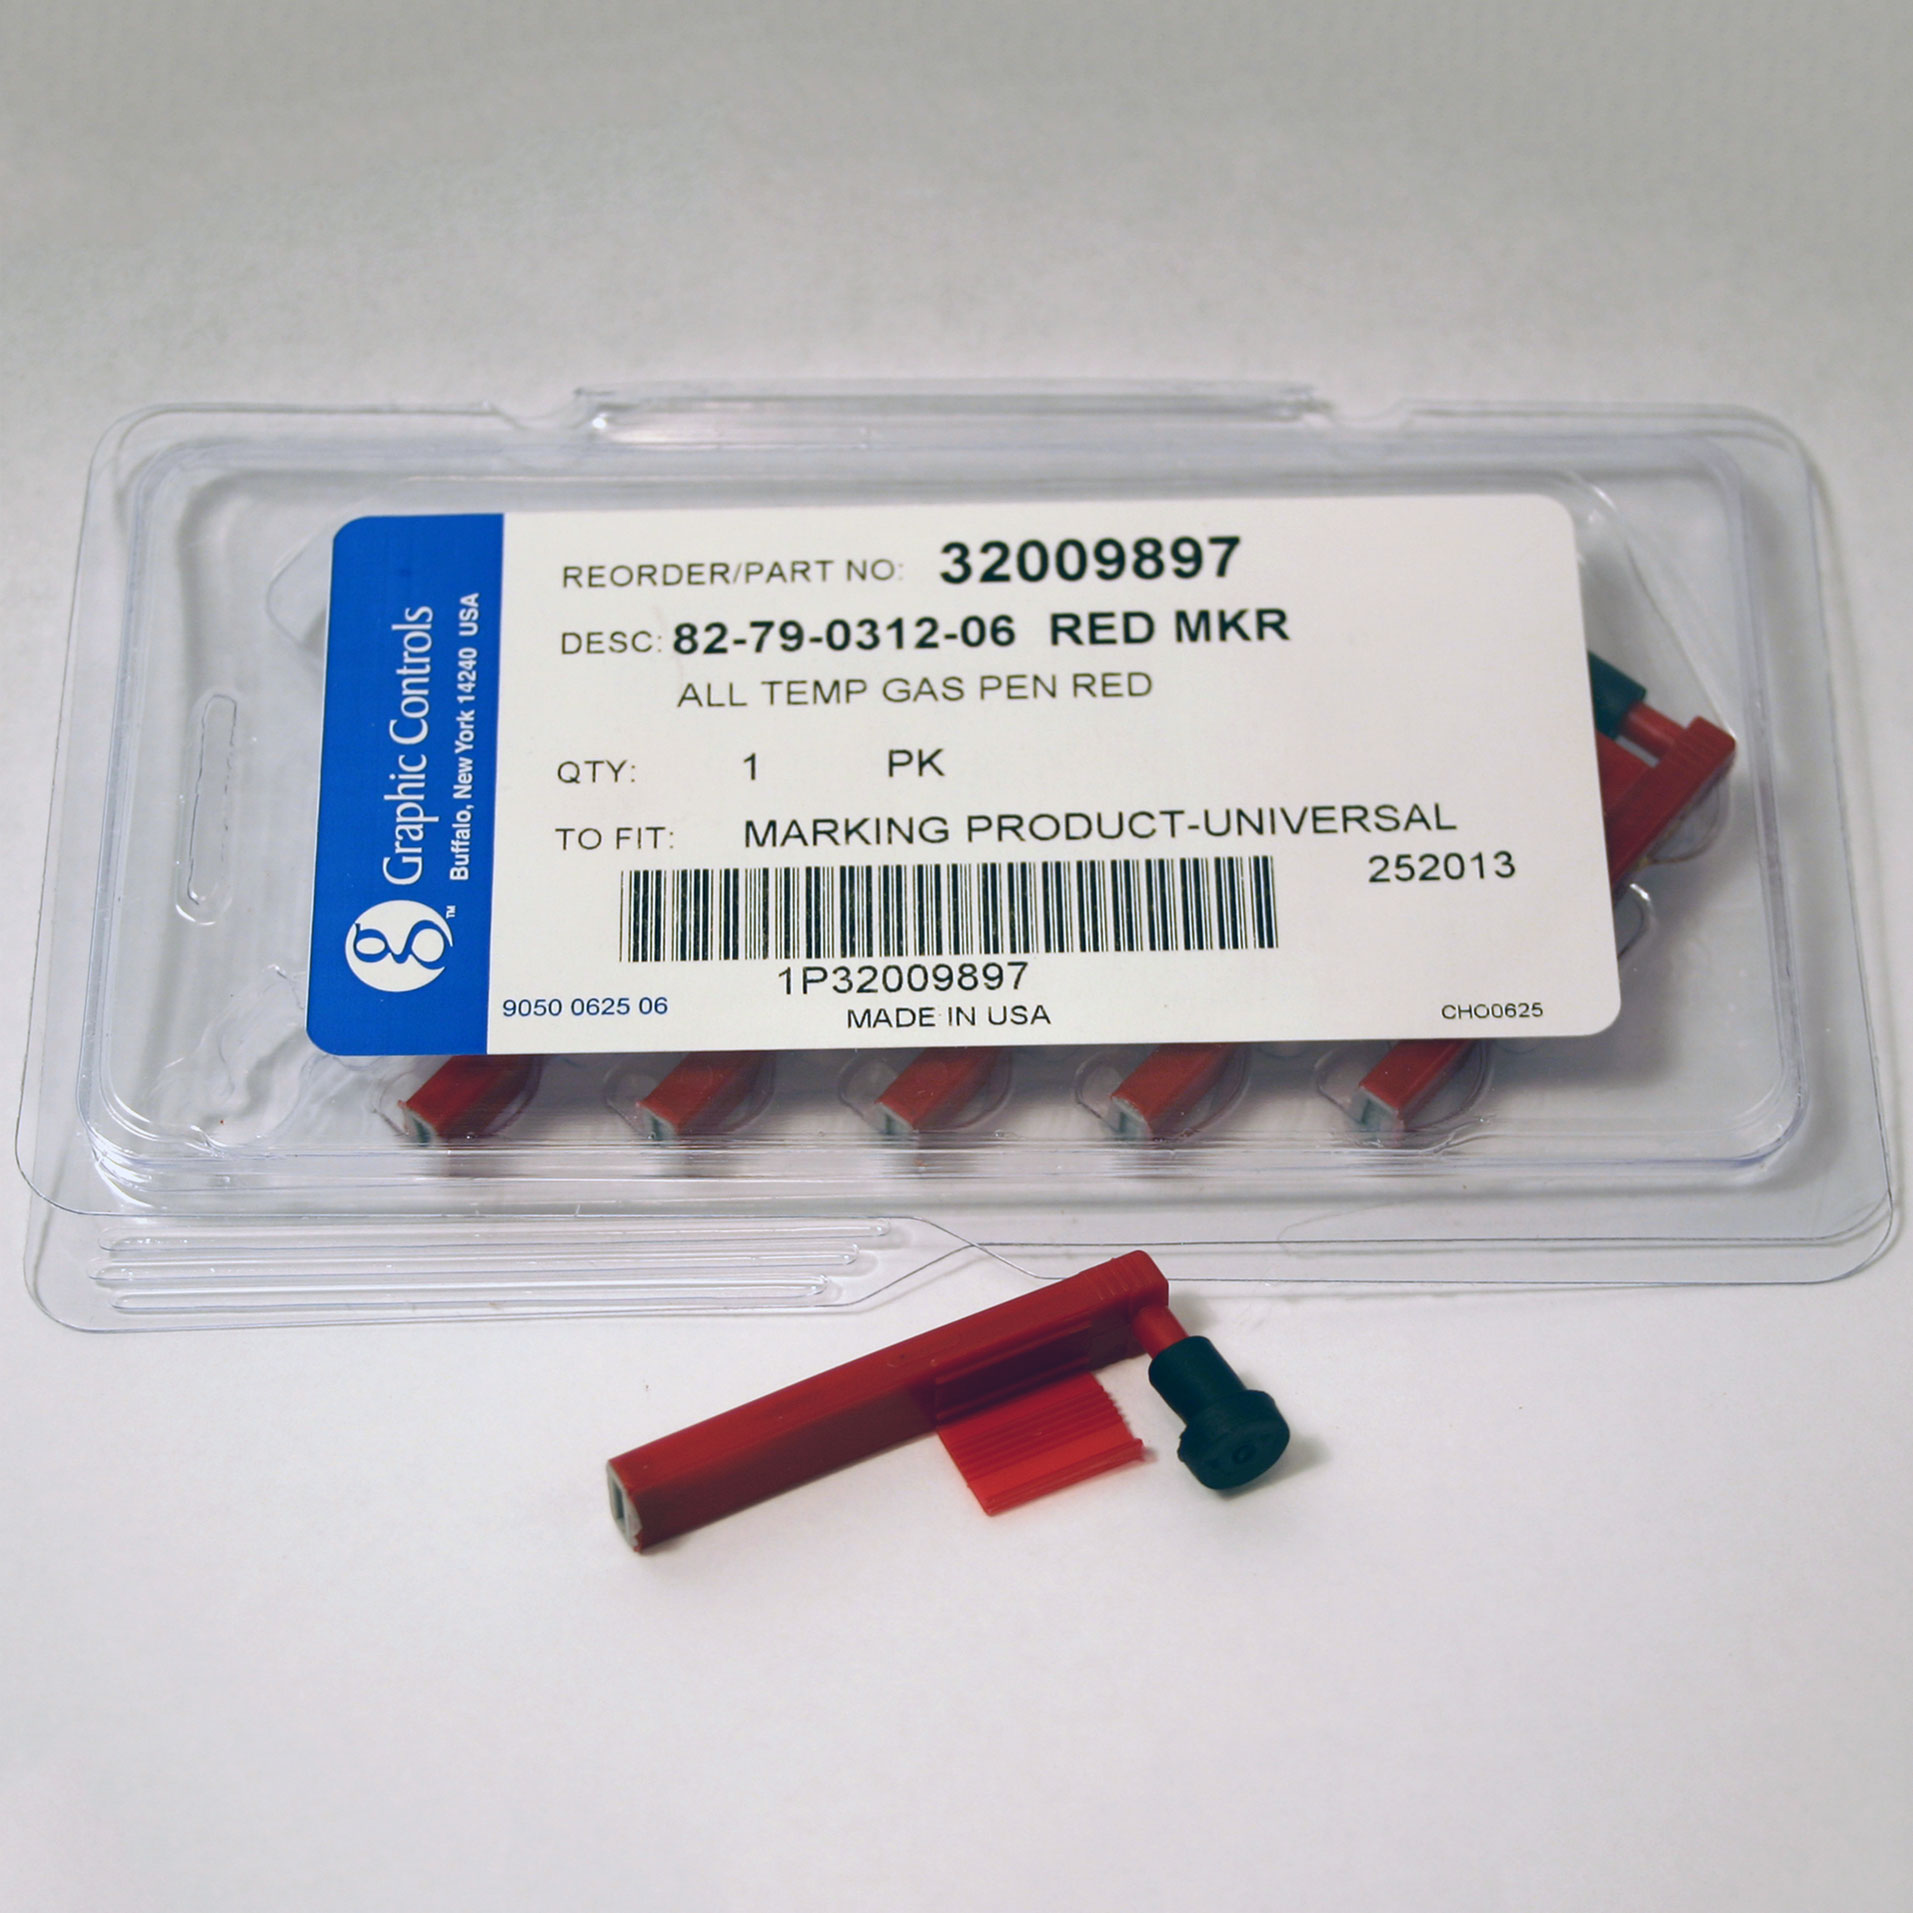 MP-MARKING PRODUCT-UNIVERSAL MP  82-79-0312-06  RED MKR